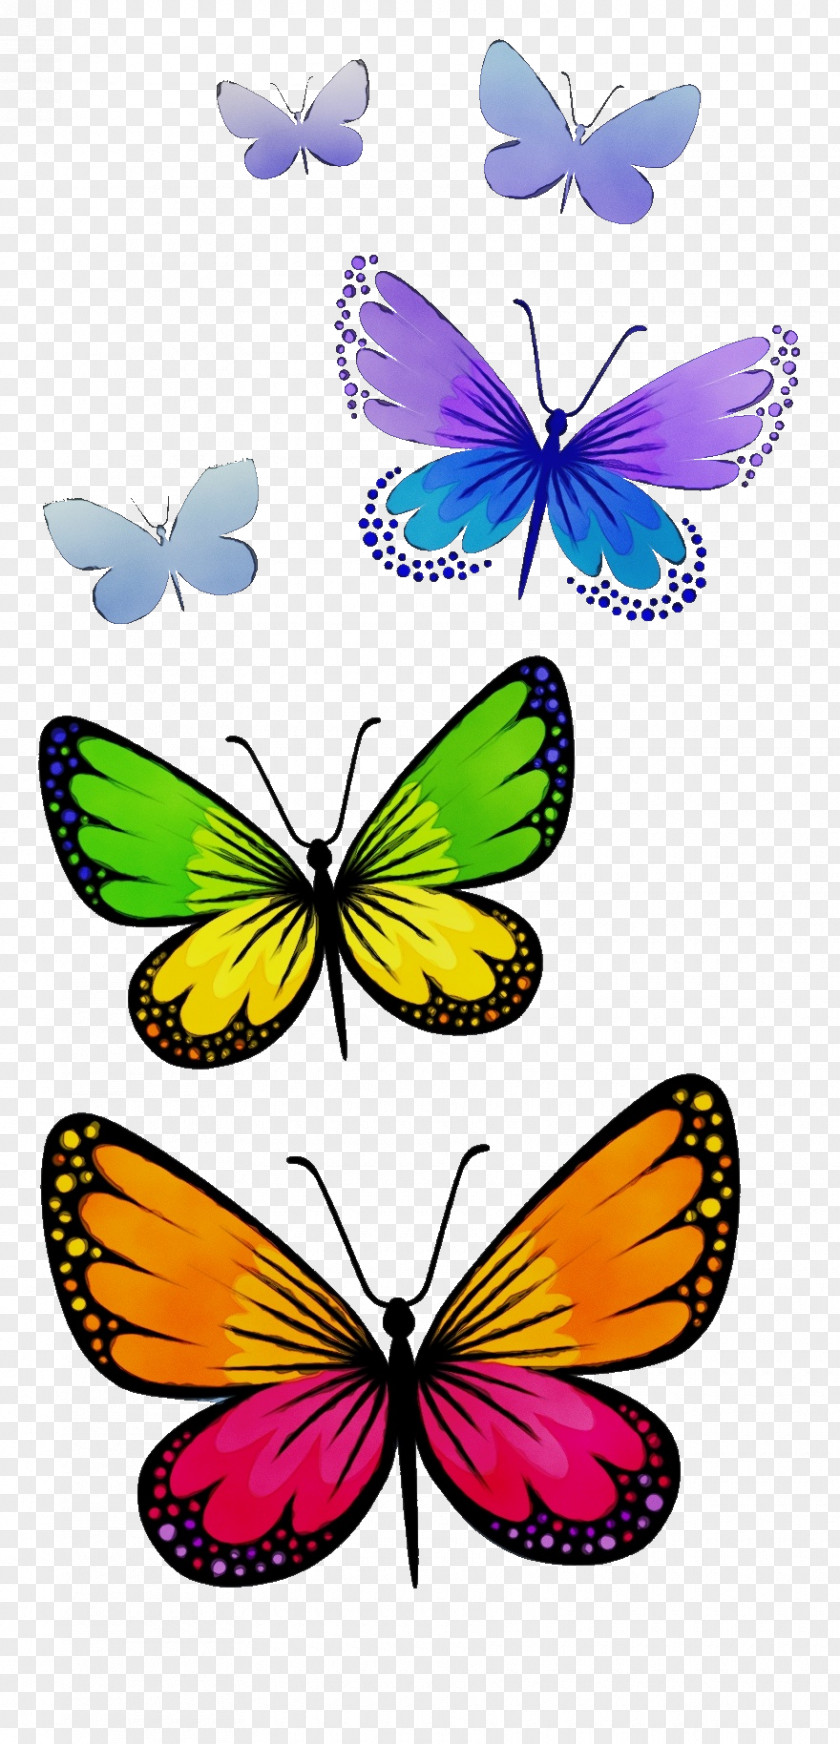 Moths And Butterflies Butterfly Insect Pollinator Wing PNG